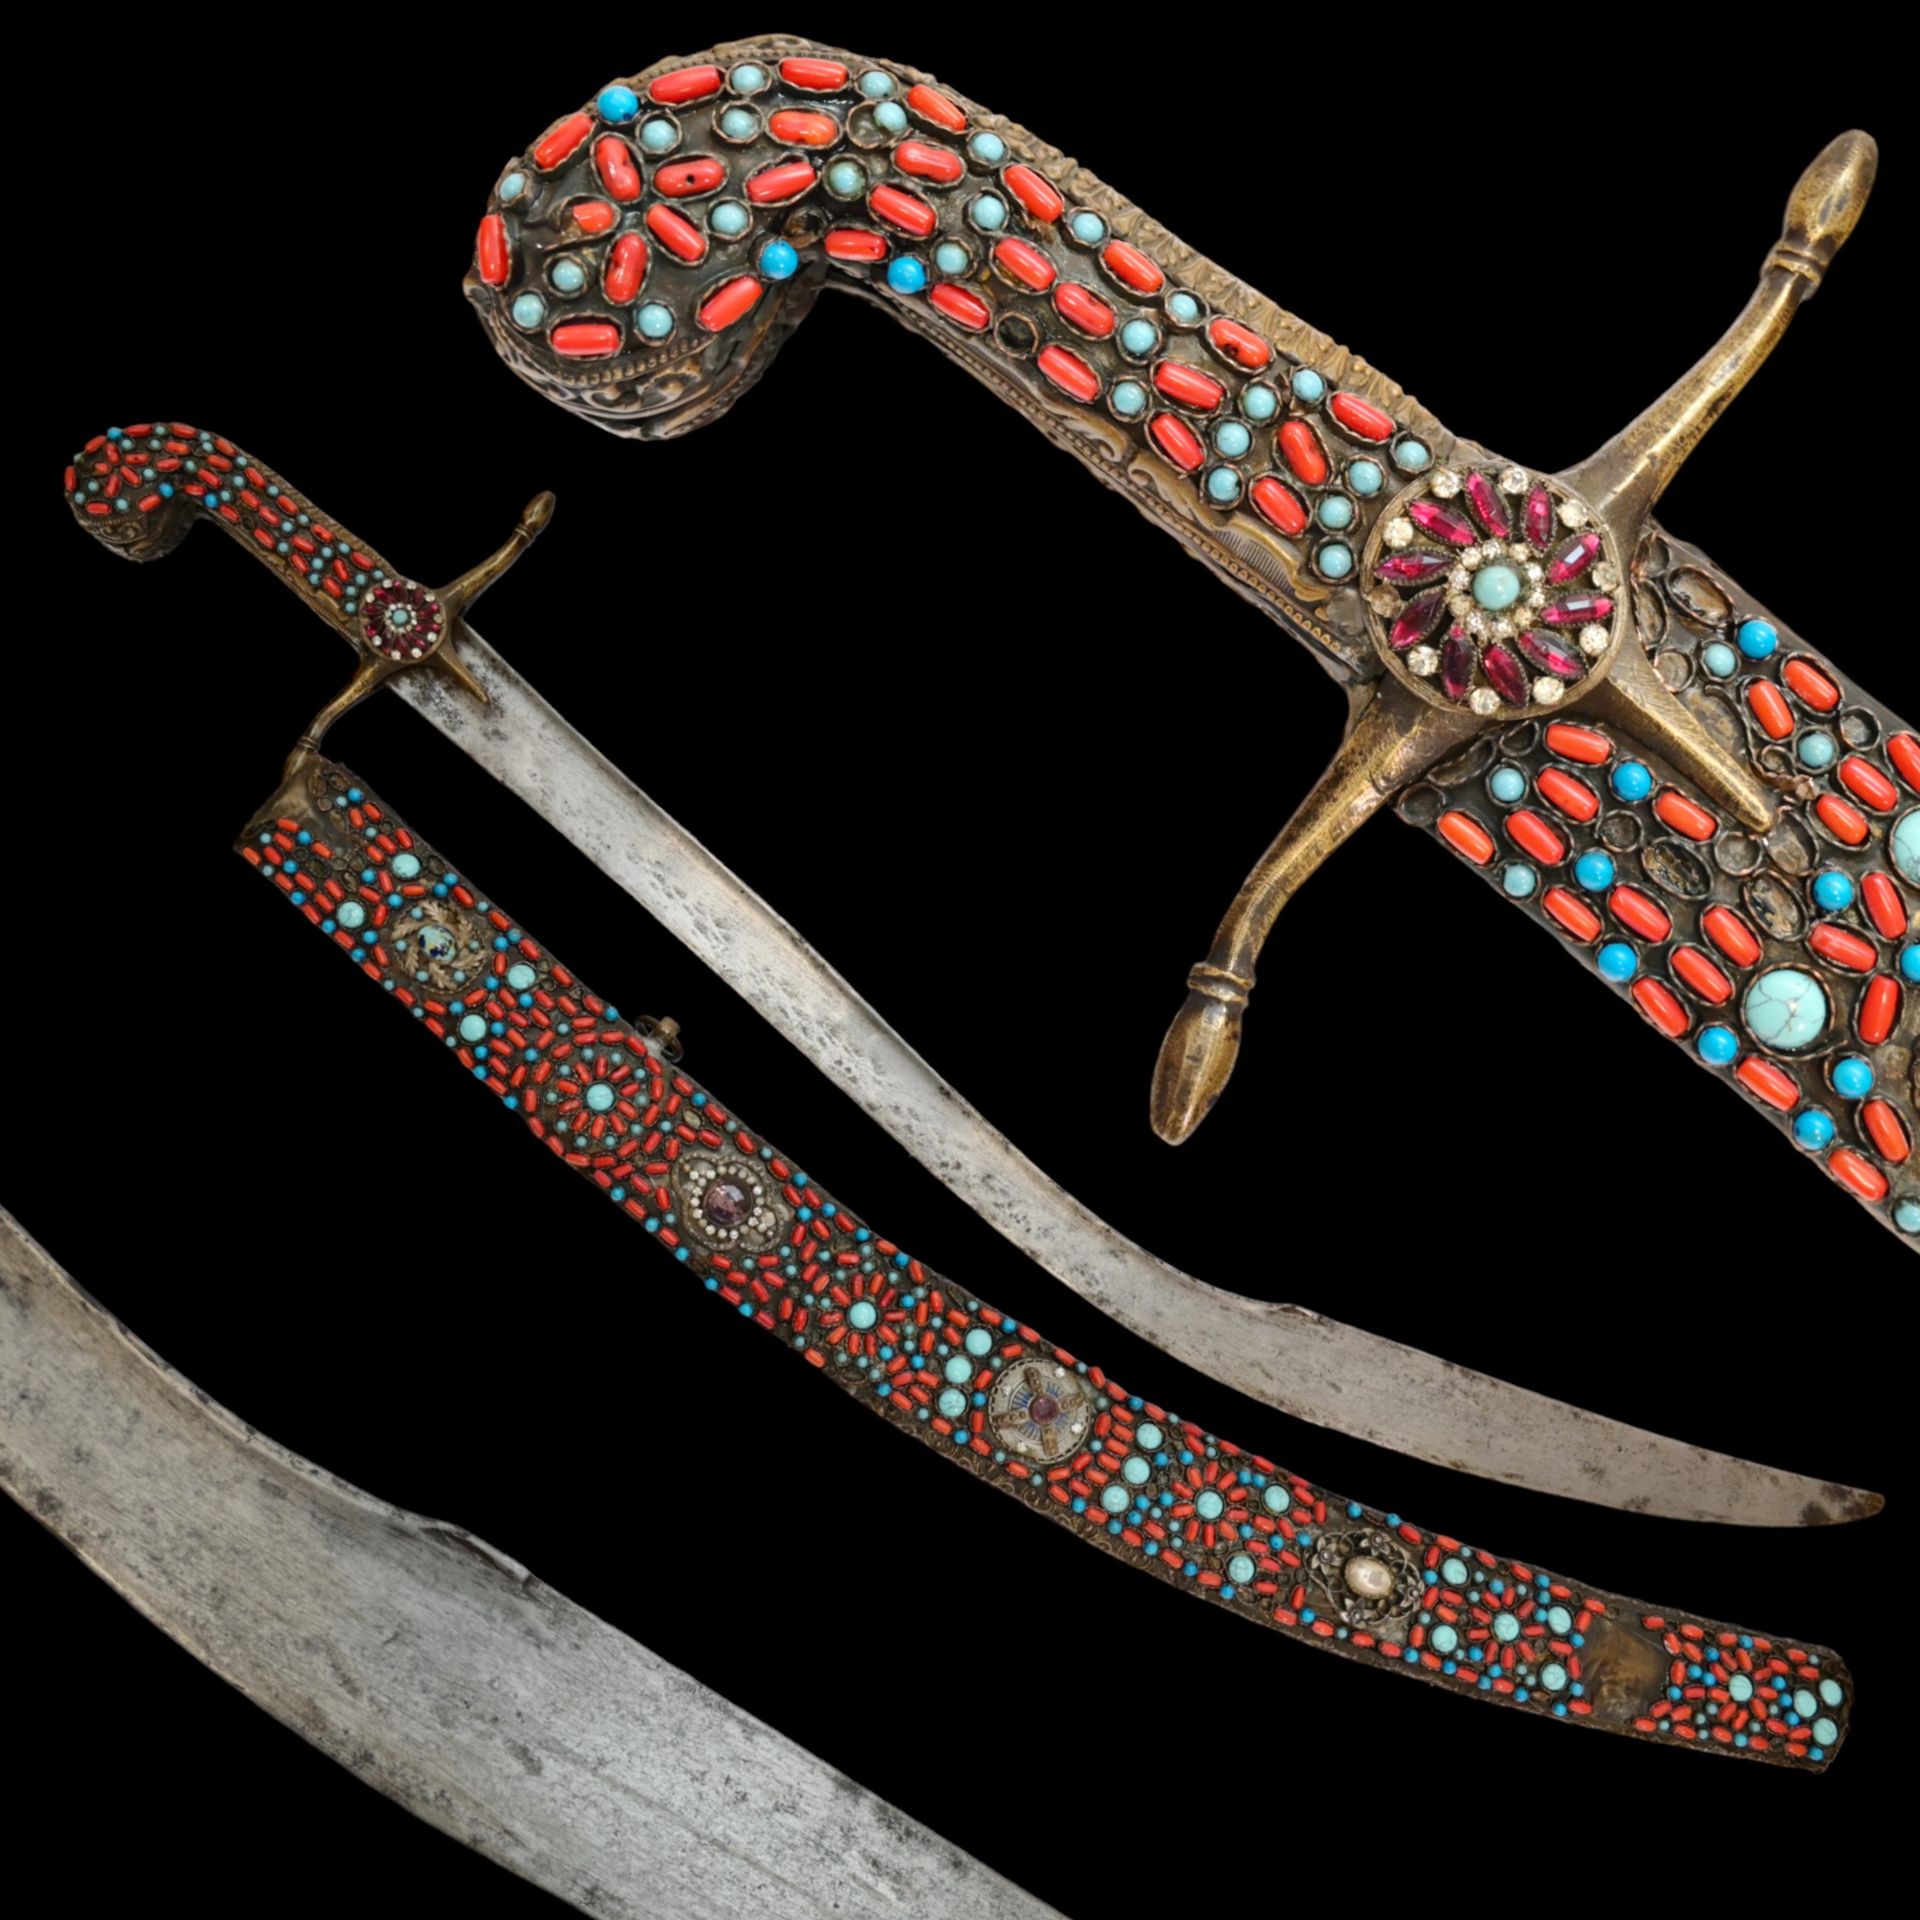 Rare Ottoman sword, Kilij, Pala, decorated with corals and turquoise, Turkey, Trabzon, around 1800.